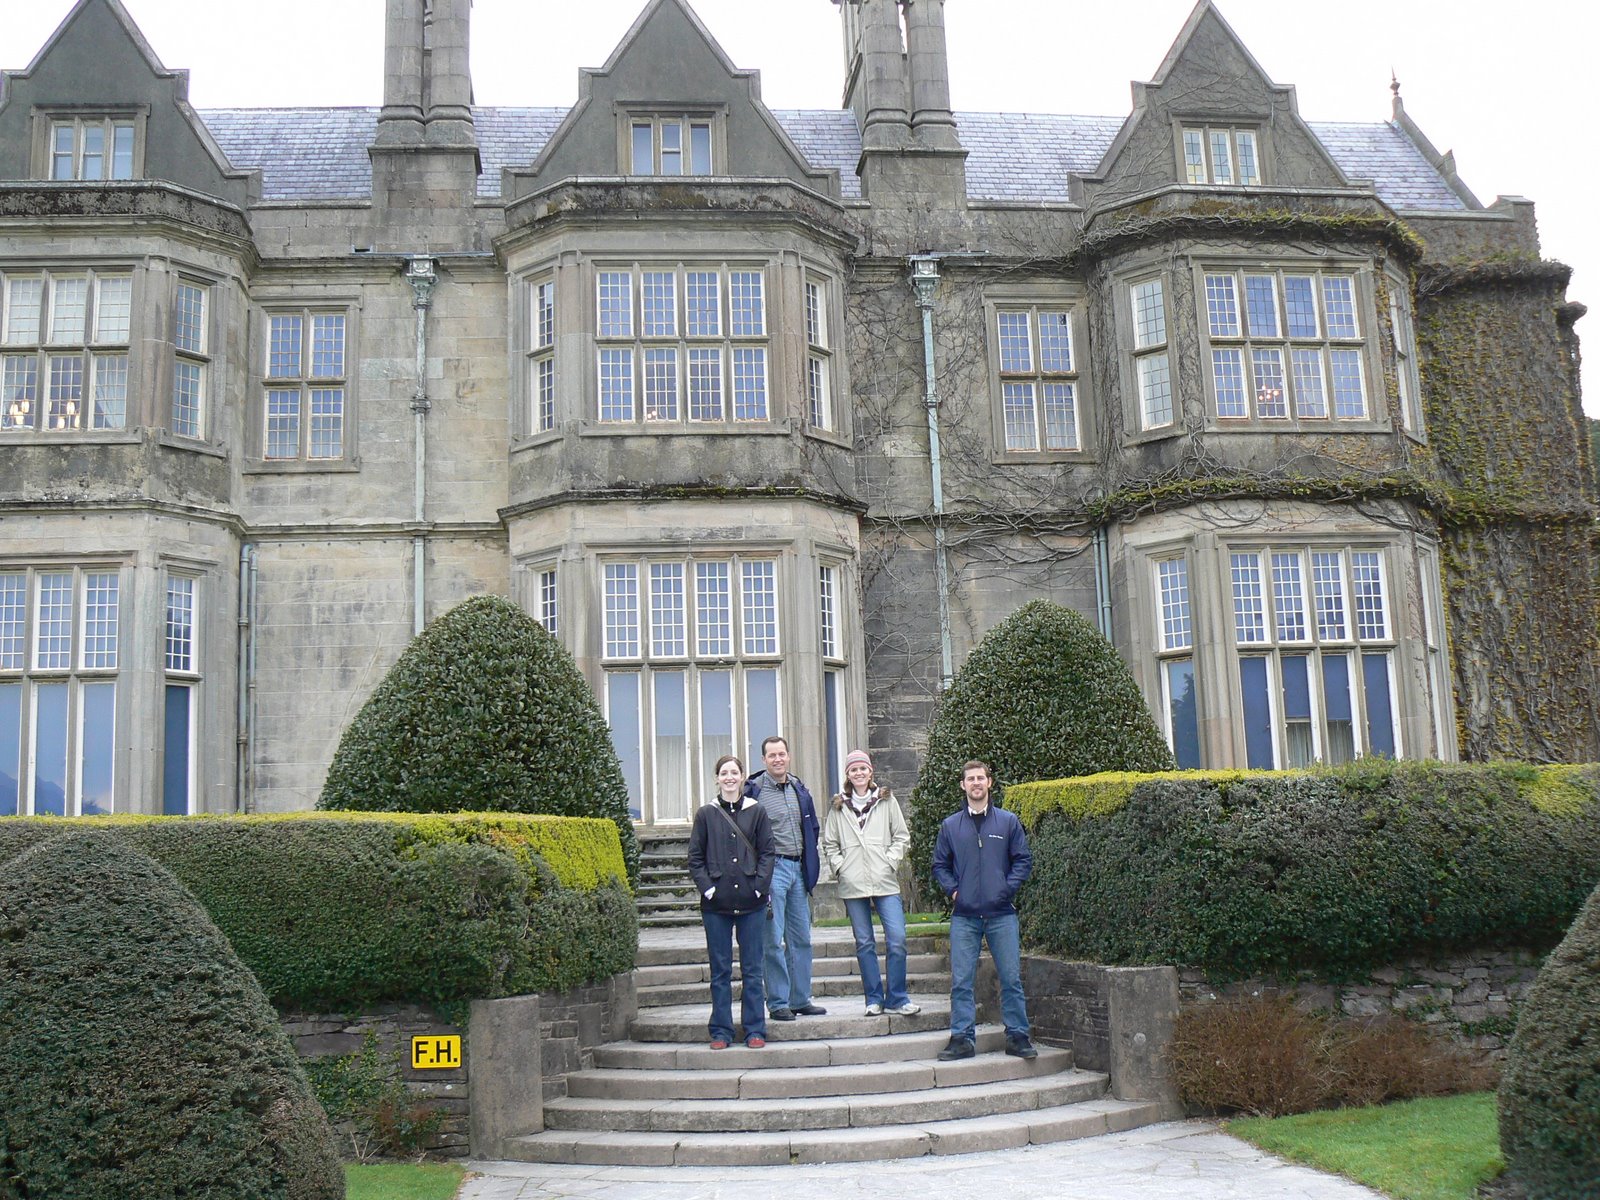 [Muckross+House+with+people.jpg]